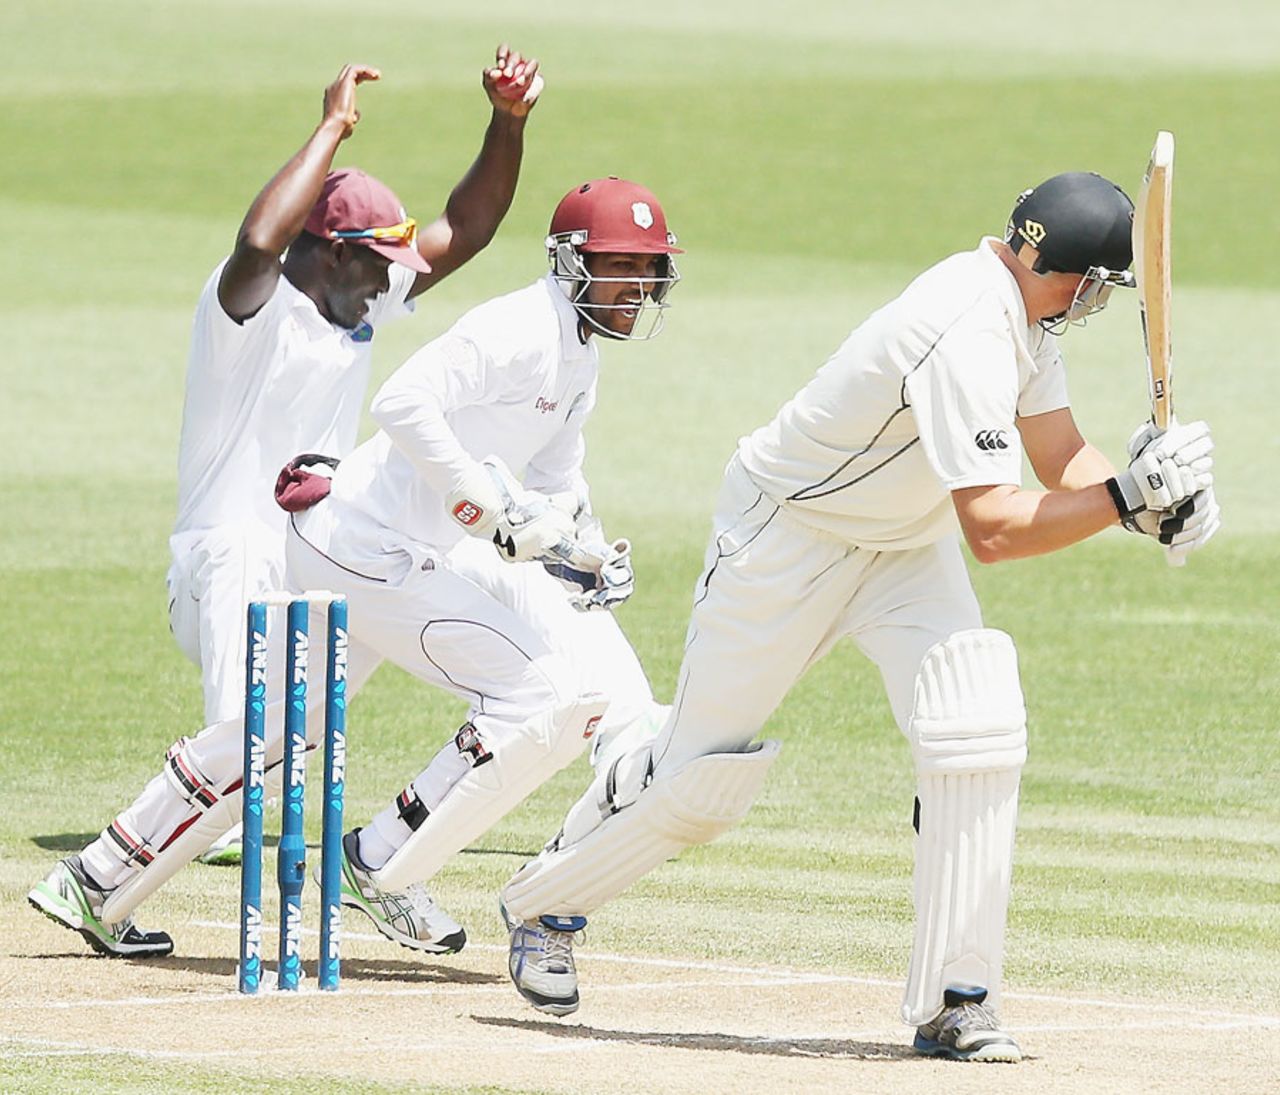 Peter Fulton looks behind to find himself caught by Darren Sammy at leg slip, New Zealand v West Indies, 3rd Test, Hamilton, 2nd day, December 20, 2013